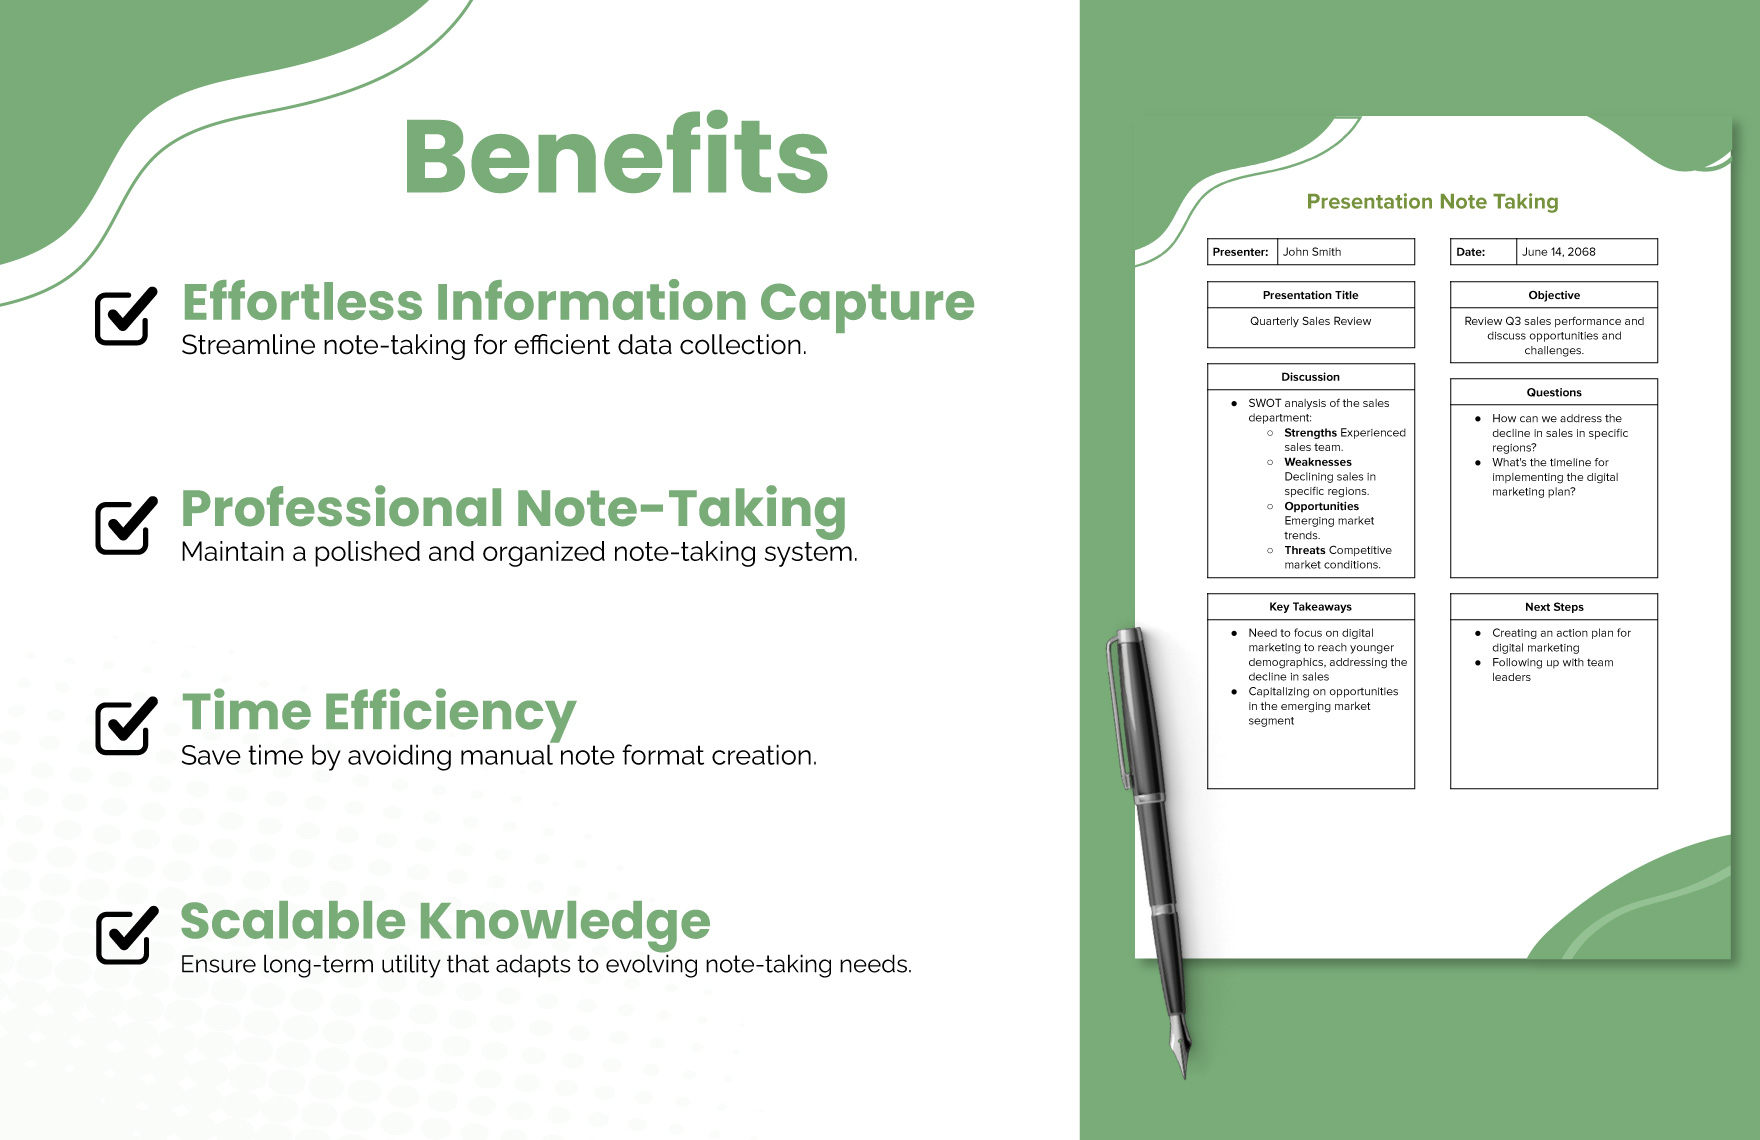 Presentation Note Taking Template